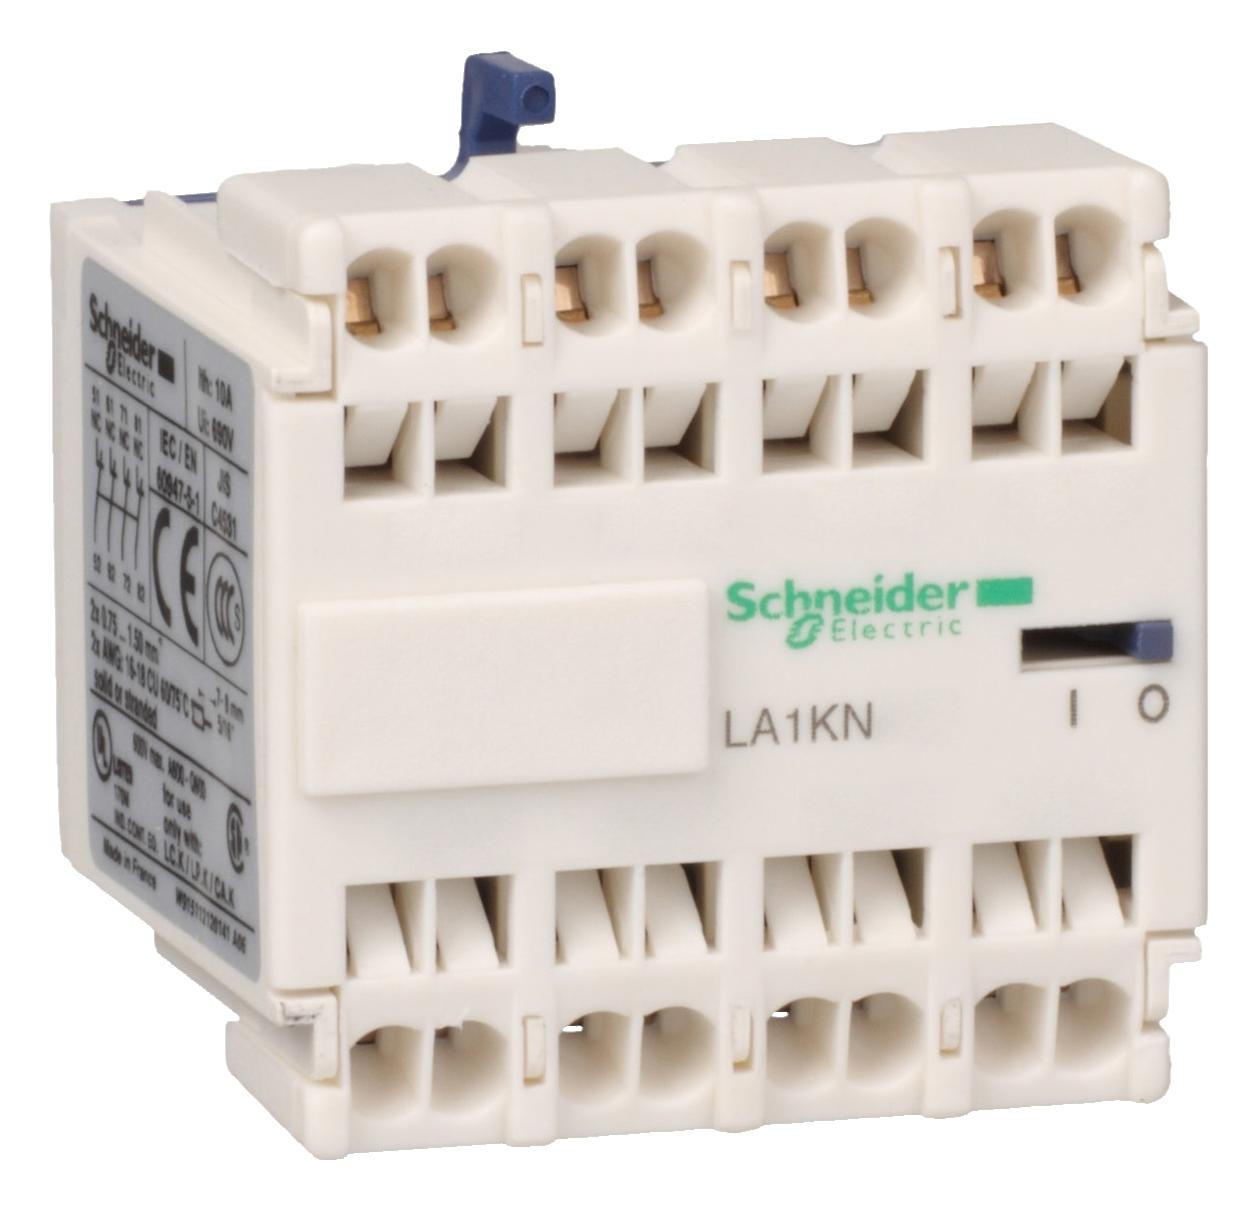 LA1KN403 AUXILIARY CONTACTS SCHNEIDER ELECTRIC